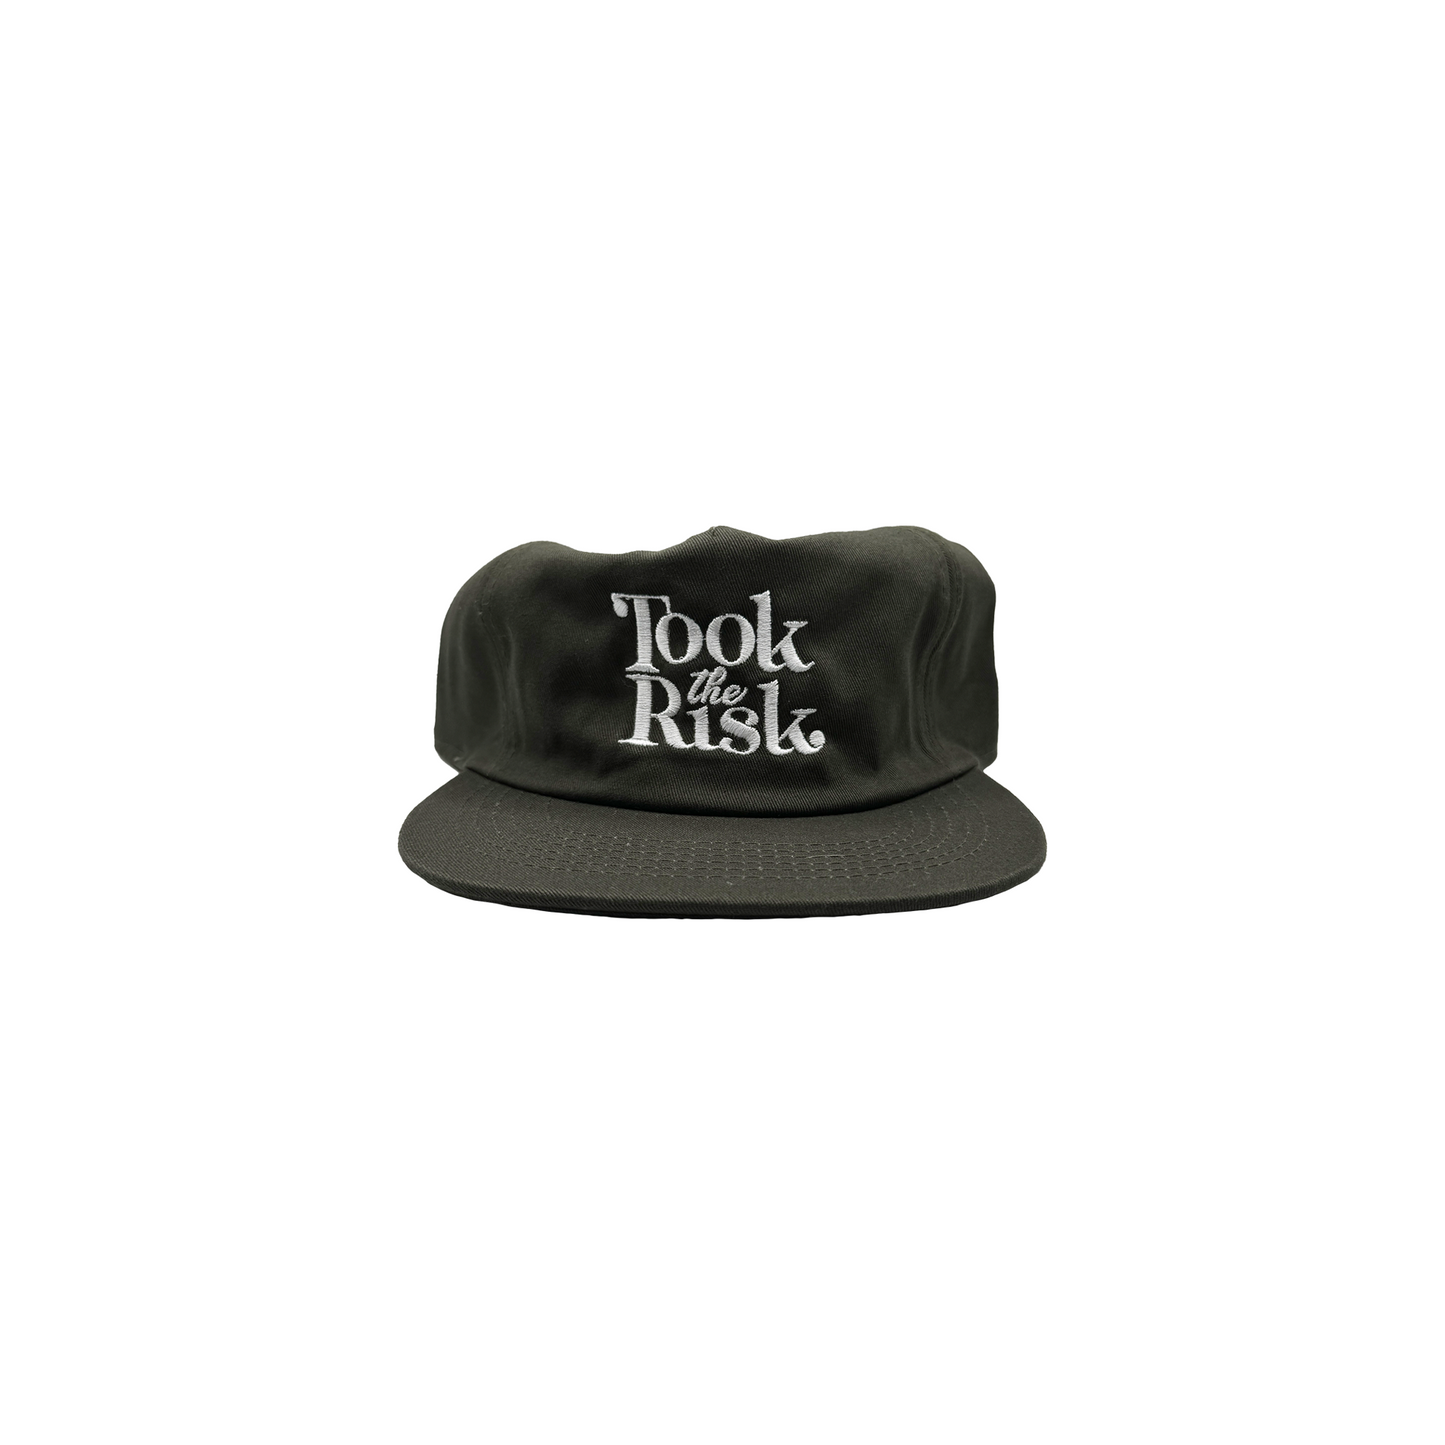 Took The Risk Hat (Olive)